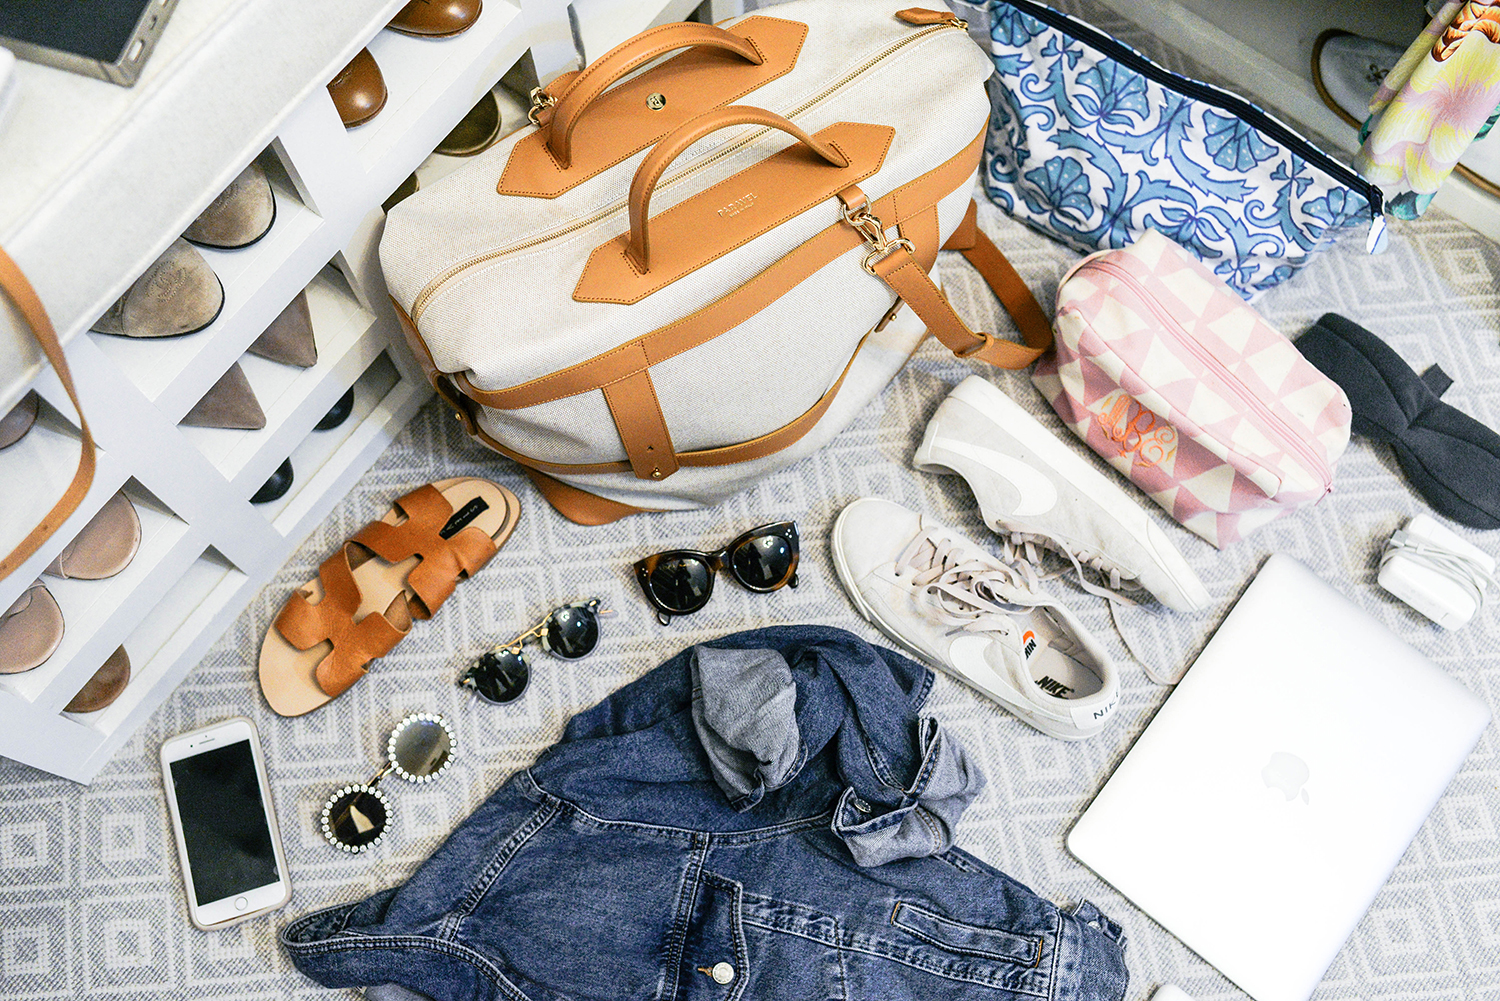 Paravel Weekender in Scout | Carry-On Packing Tips for International Travel